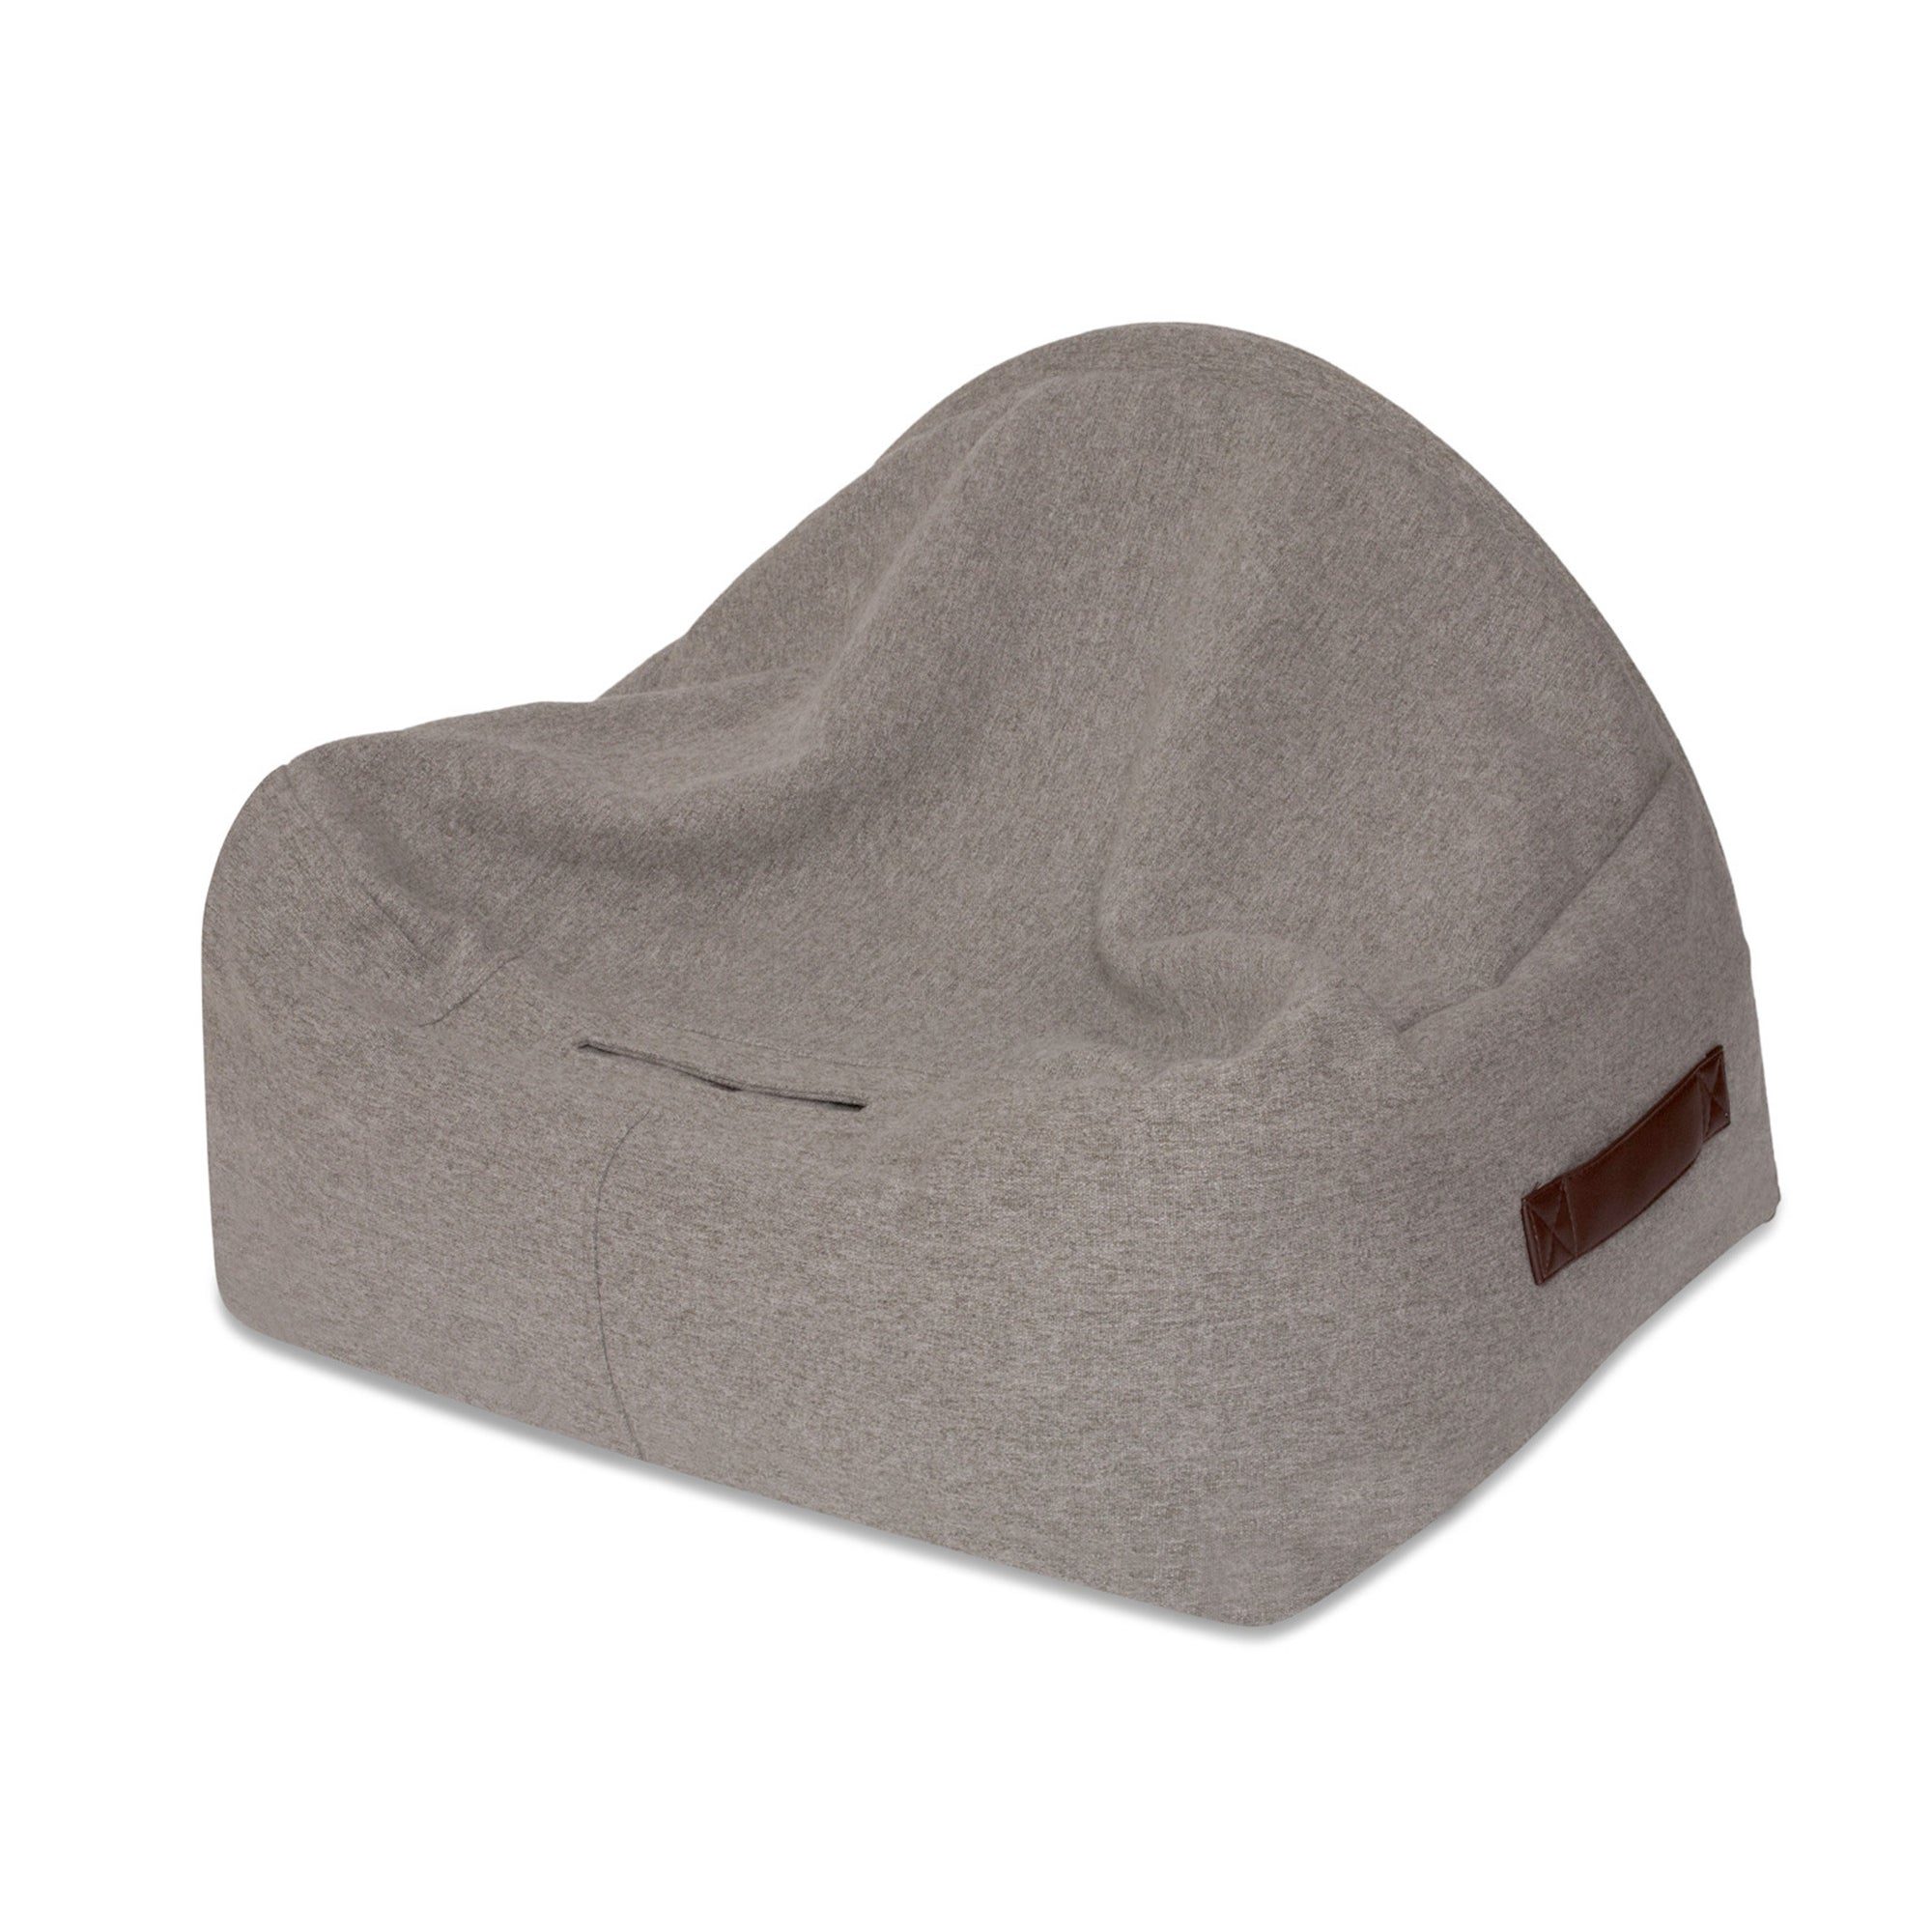 KONA CAVE® luxury snuggle cave dog bed in grey flannel fabric.  Burrowing dog bed for nesting dogs. Hund Höhlenbett